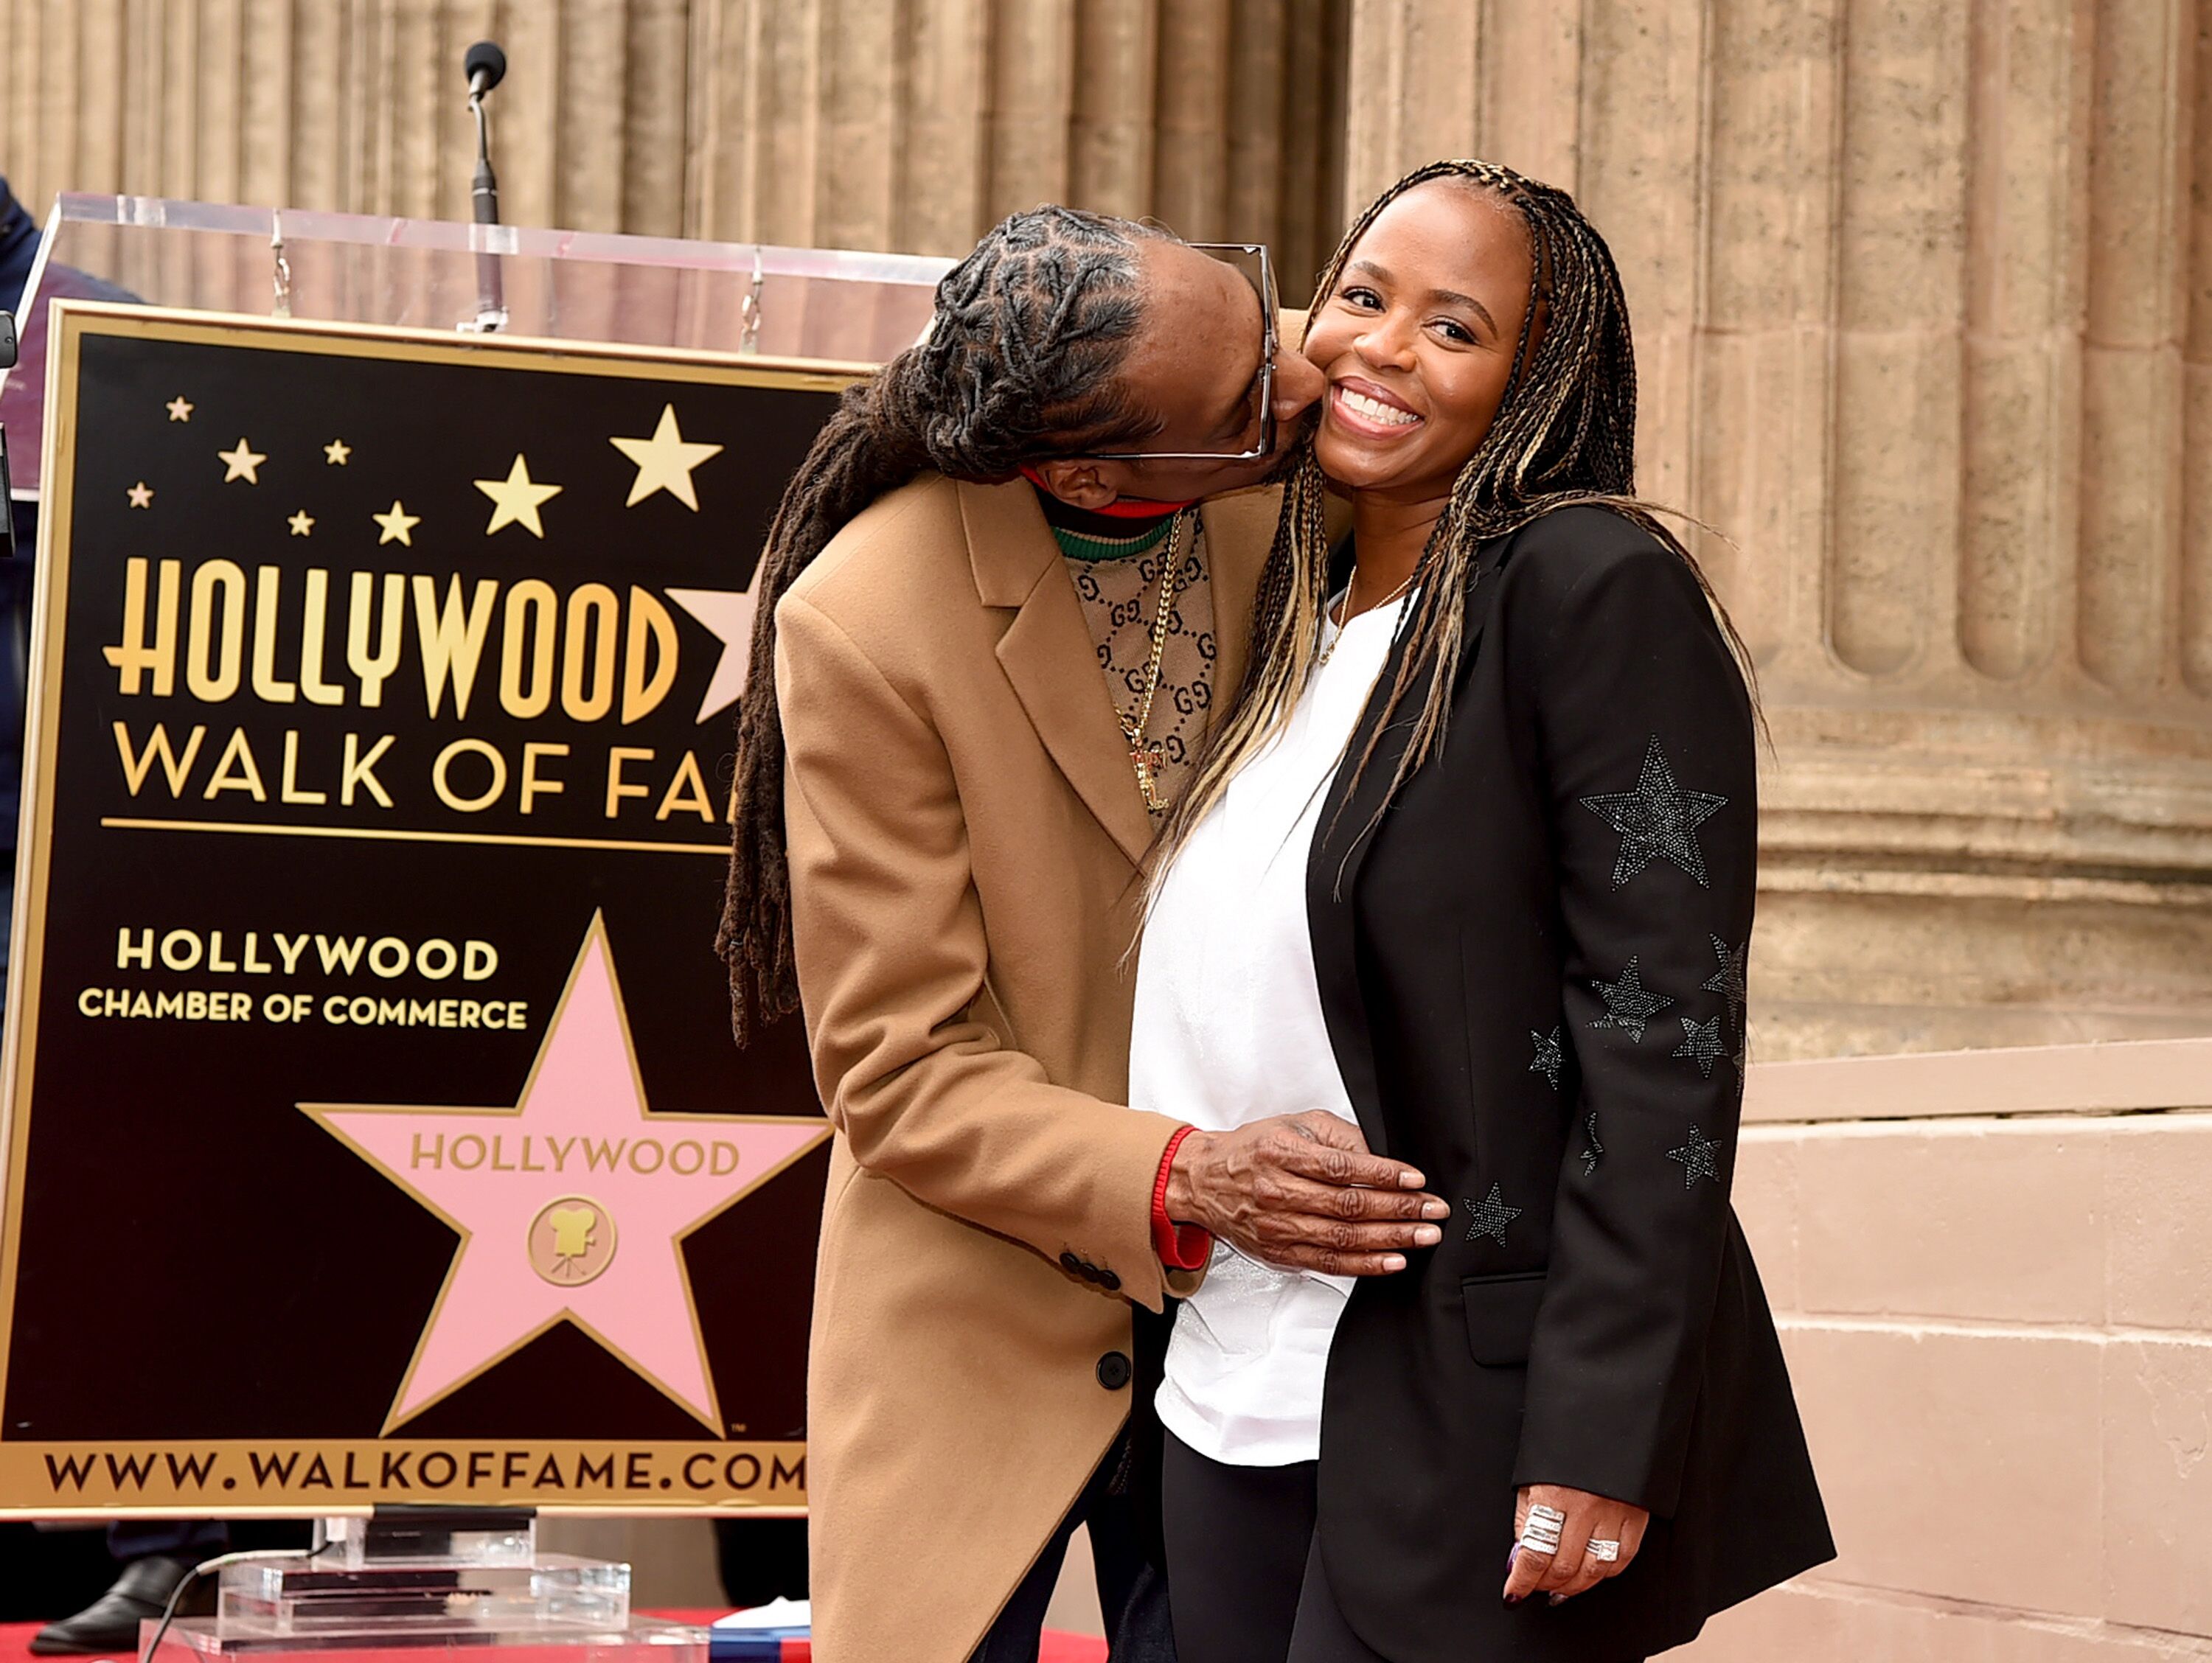 Shante Broadus and husband Snoop Dogg on the Hollywood Walk of Fame/ Source: Getty Images